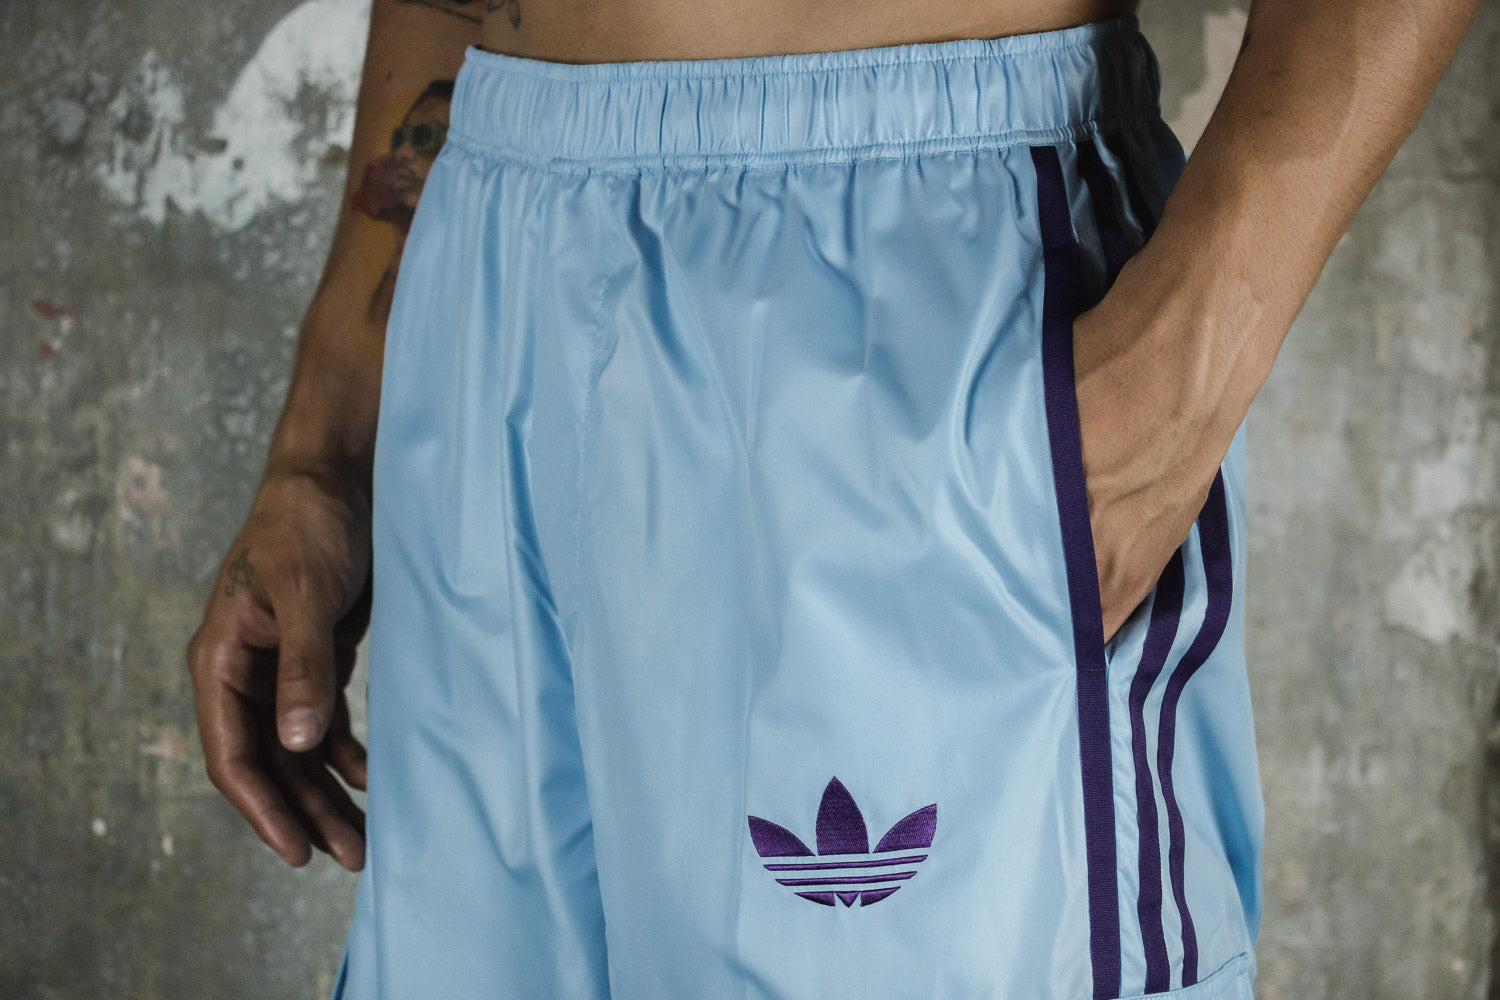 adidas x Kerwin Frost Baggy Track Pant (6772105510978)